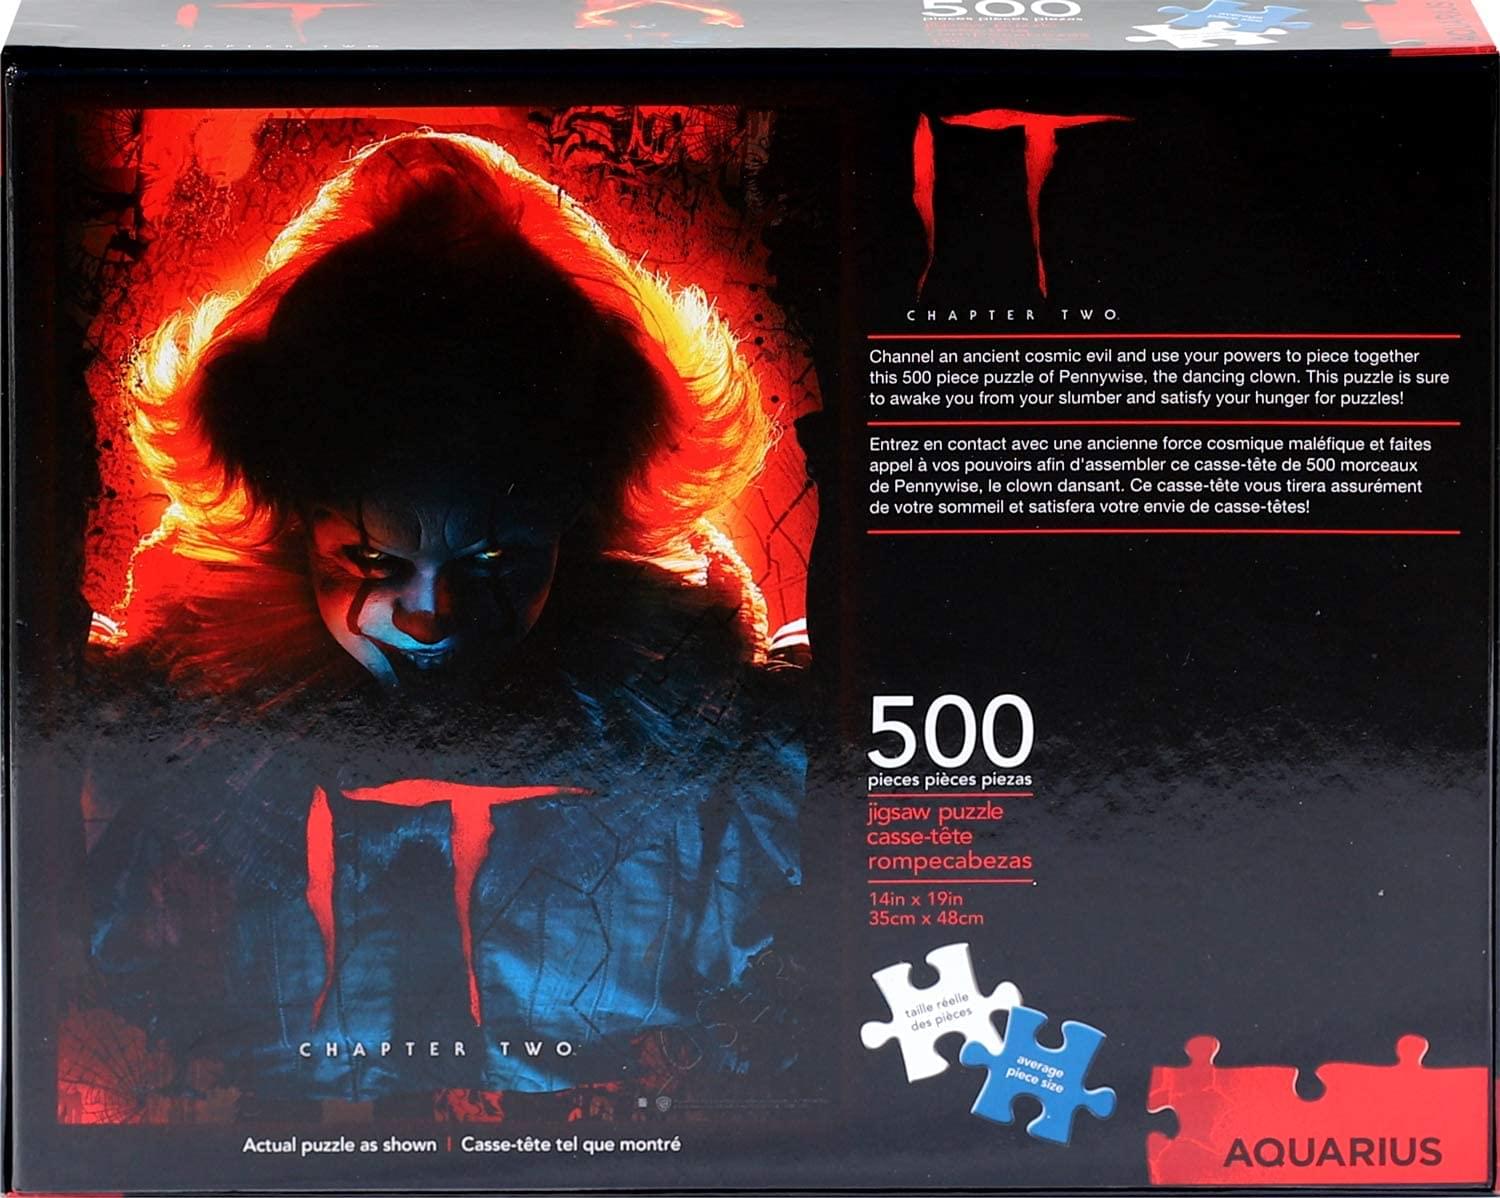 IT Chapter 2 500 Piece Jigsaw Puzzle